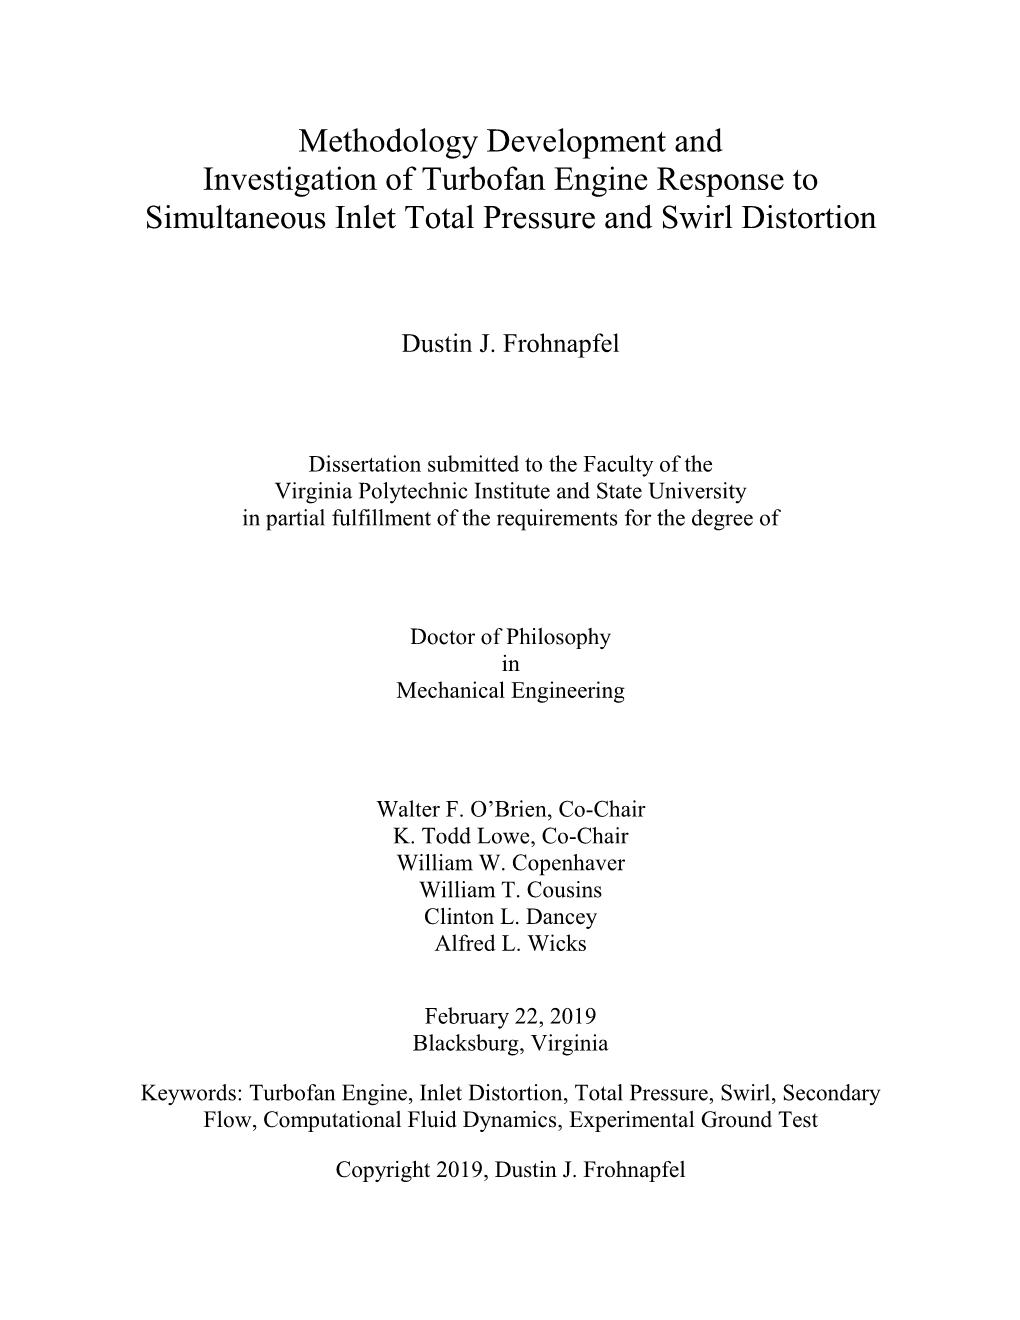 Methodology Development and Investigation of Turbofan Engine Response to Simultaneous Inlet Total Pressure and Swirl Distortion